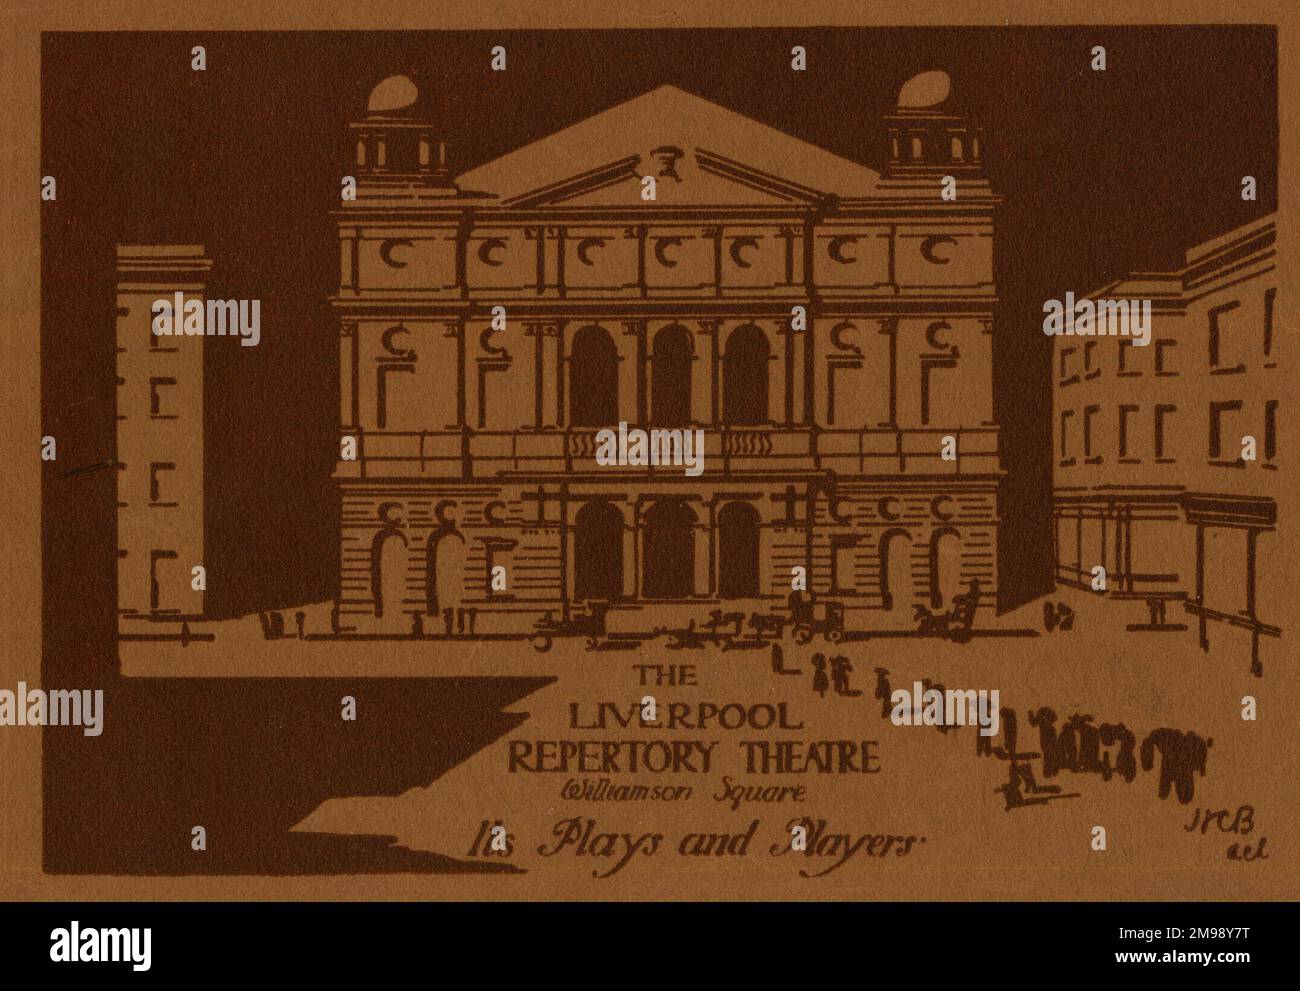 Liverpool Repertory Theatre, Williamson Square, Liverpool -- Its Plays and Players. Stock Photo